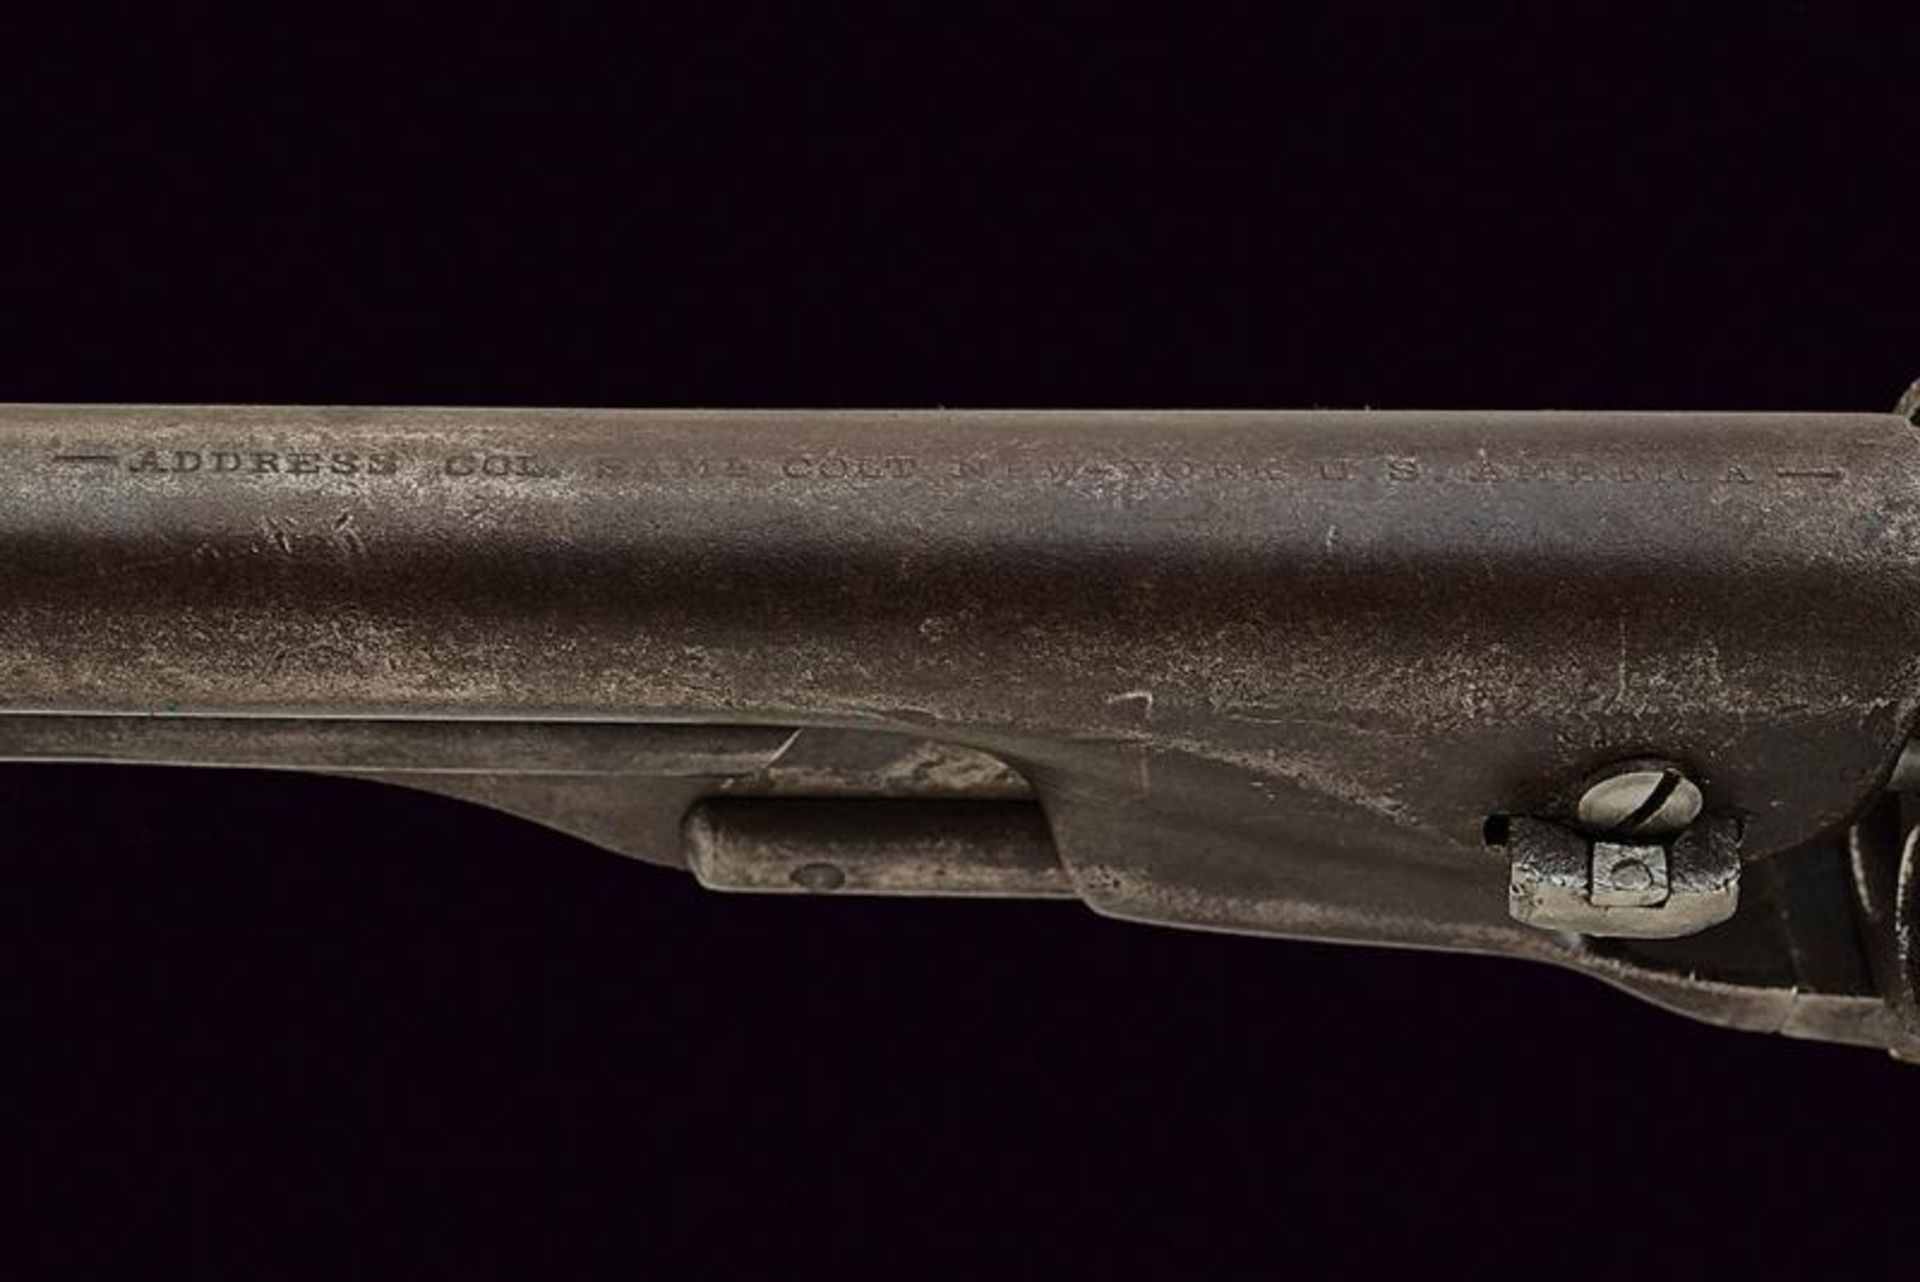 A 1860 Colt Model Army Revolver - Image 4 of 5